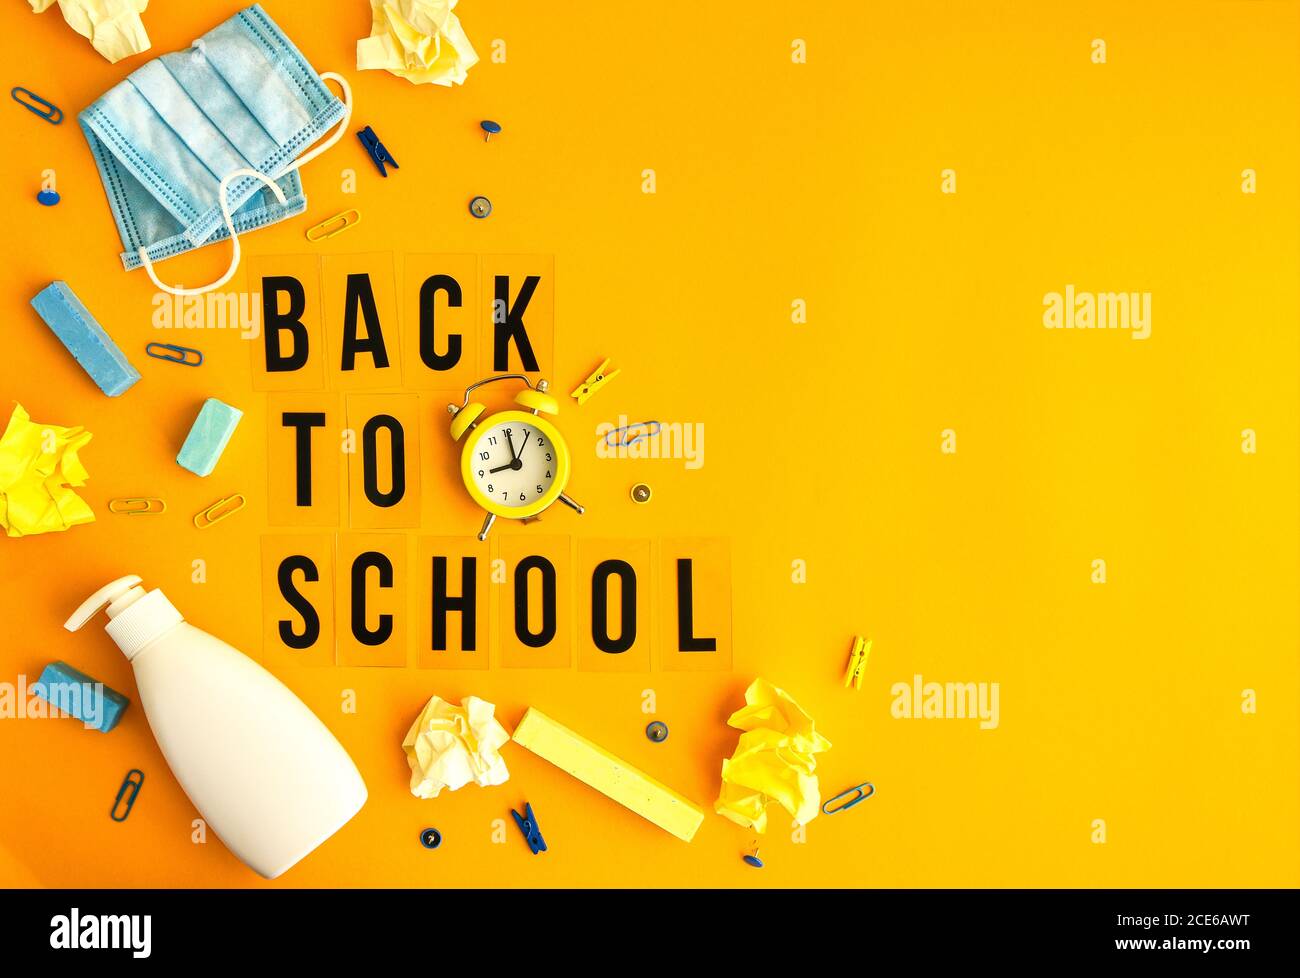 Text Back To School On Yellow Background With School Supplies Protective Face Mask And Sanitizer Antiseptic New Normal School Quarantine Concept Stock Photo Alamy